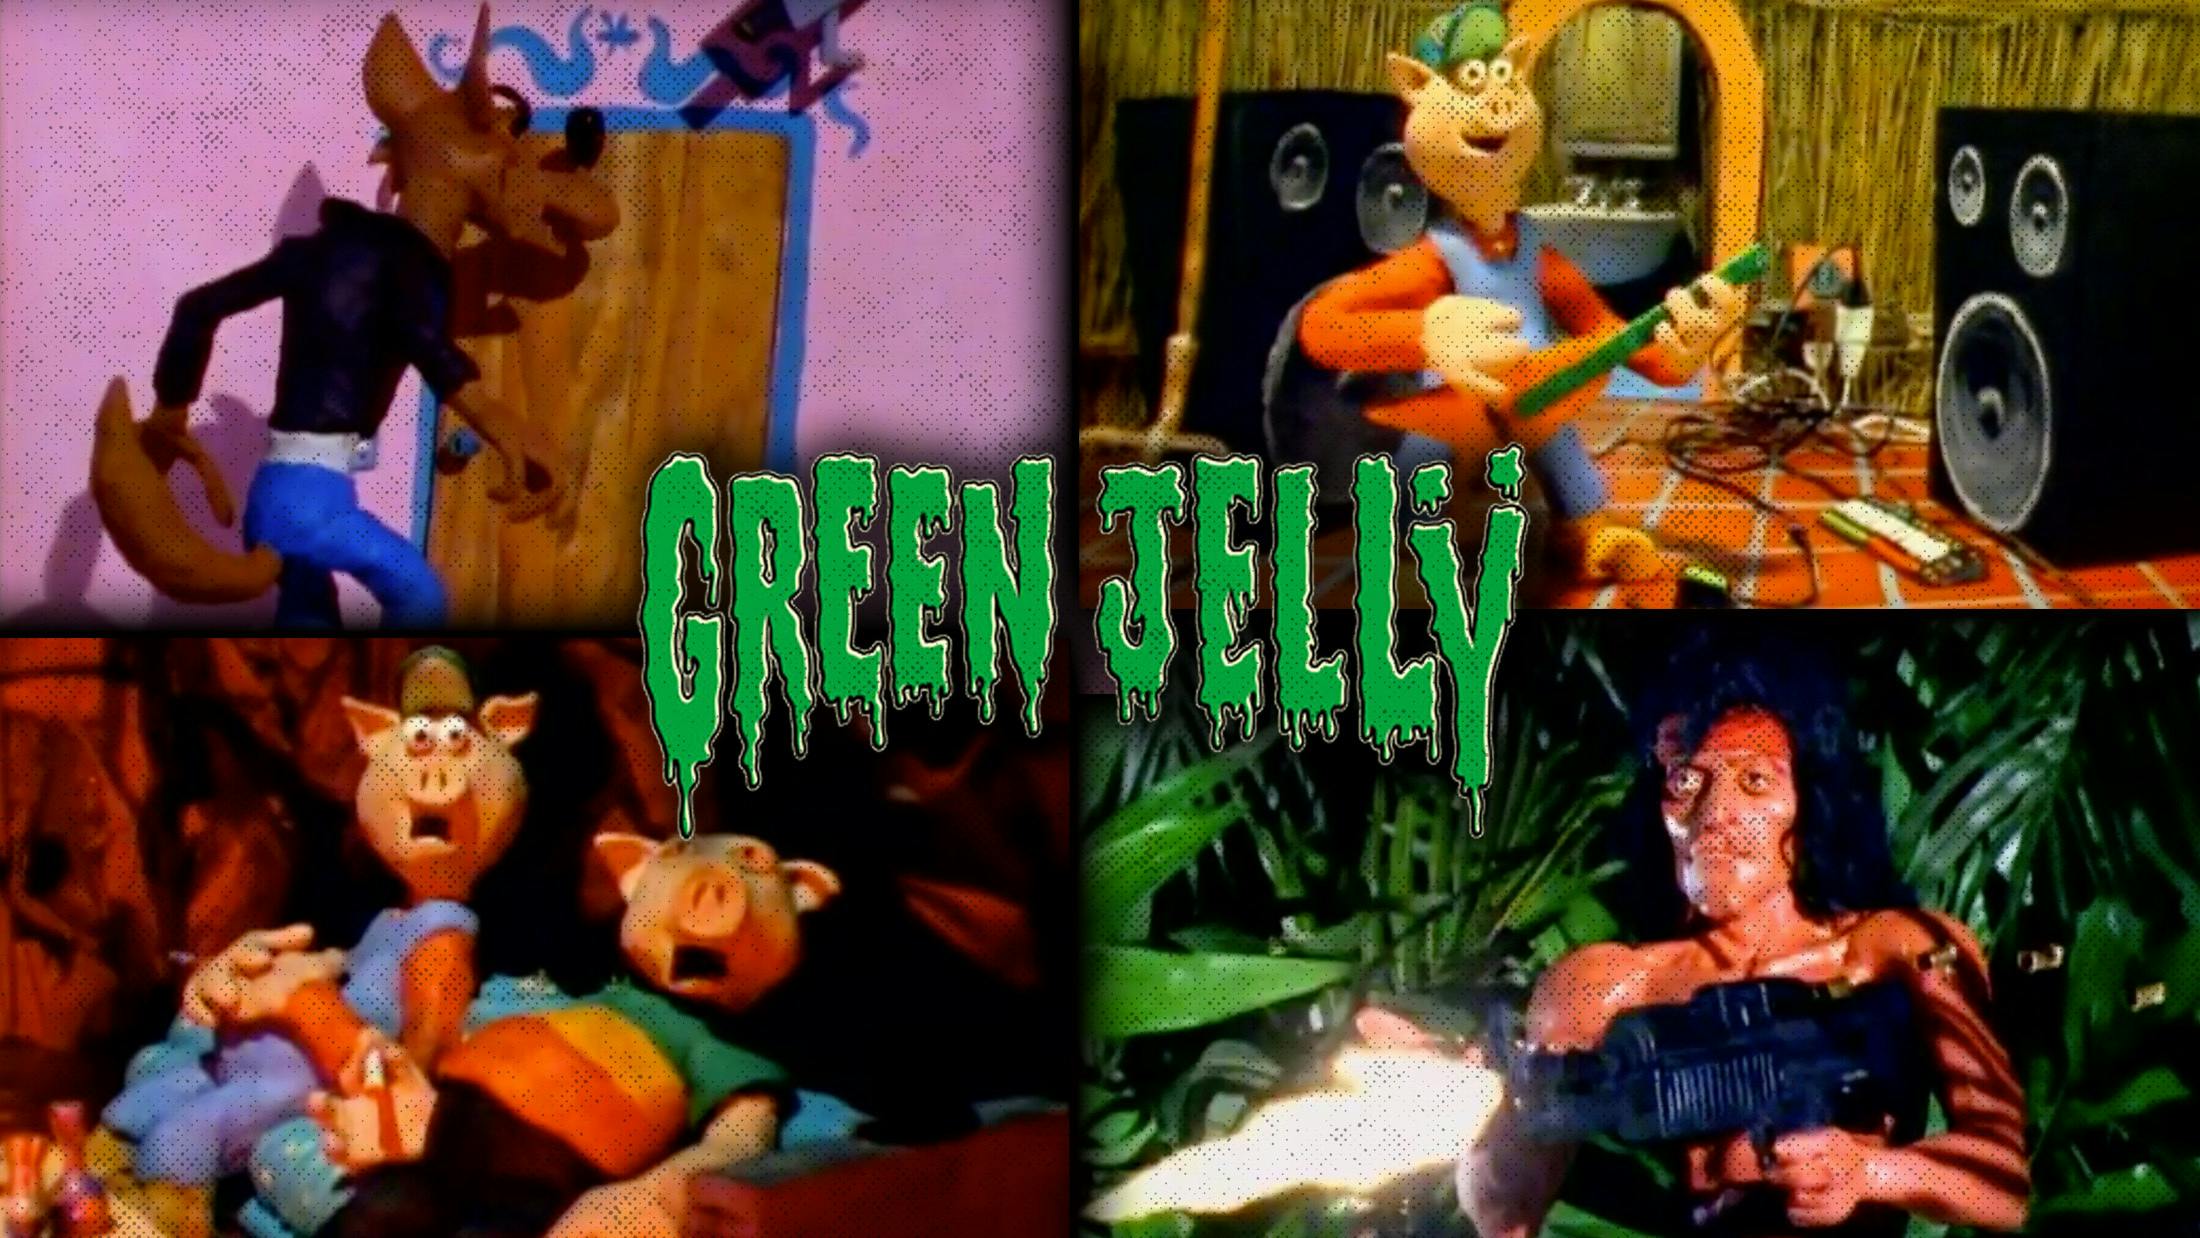 A Deep Dive Into Green Jelly’s Three Little Pigs Video